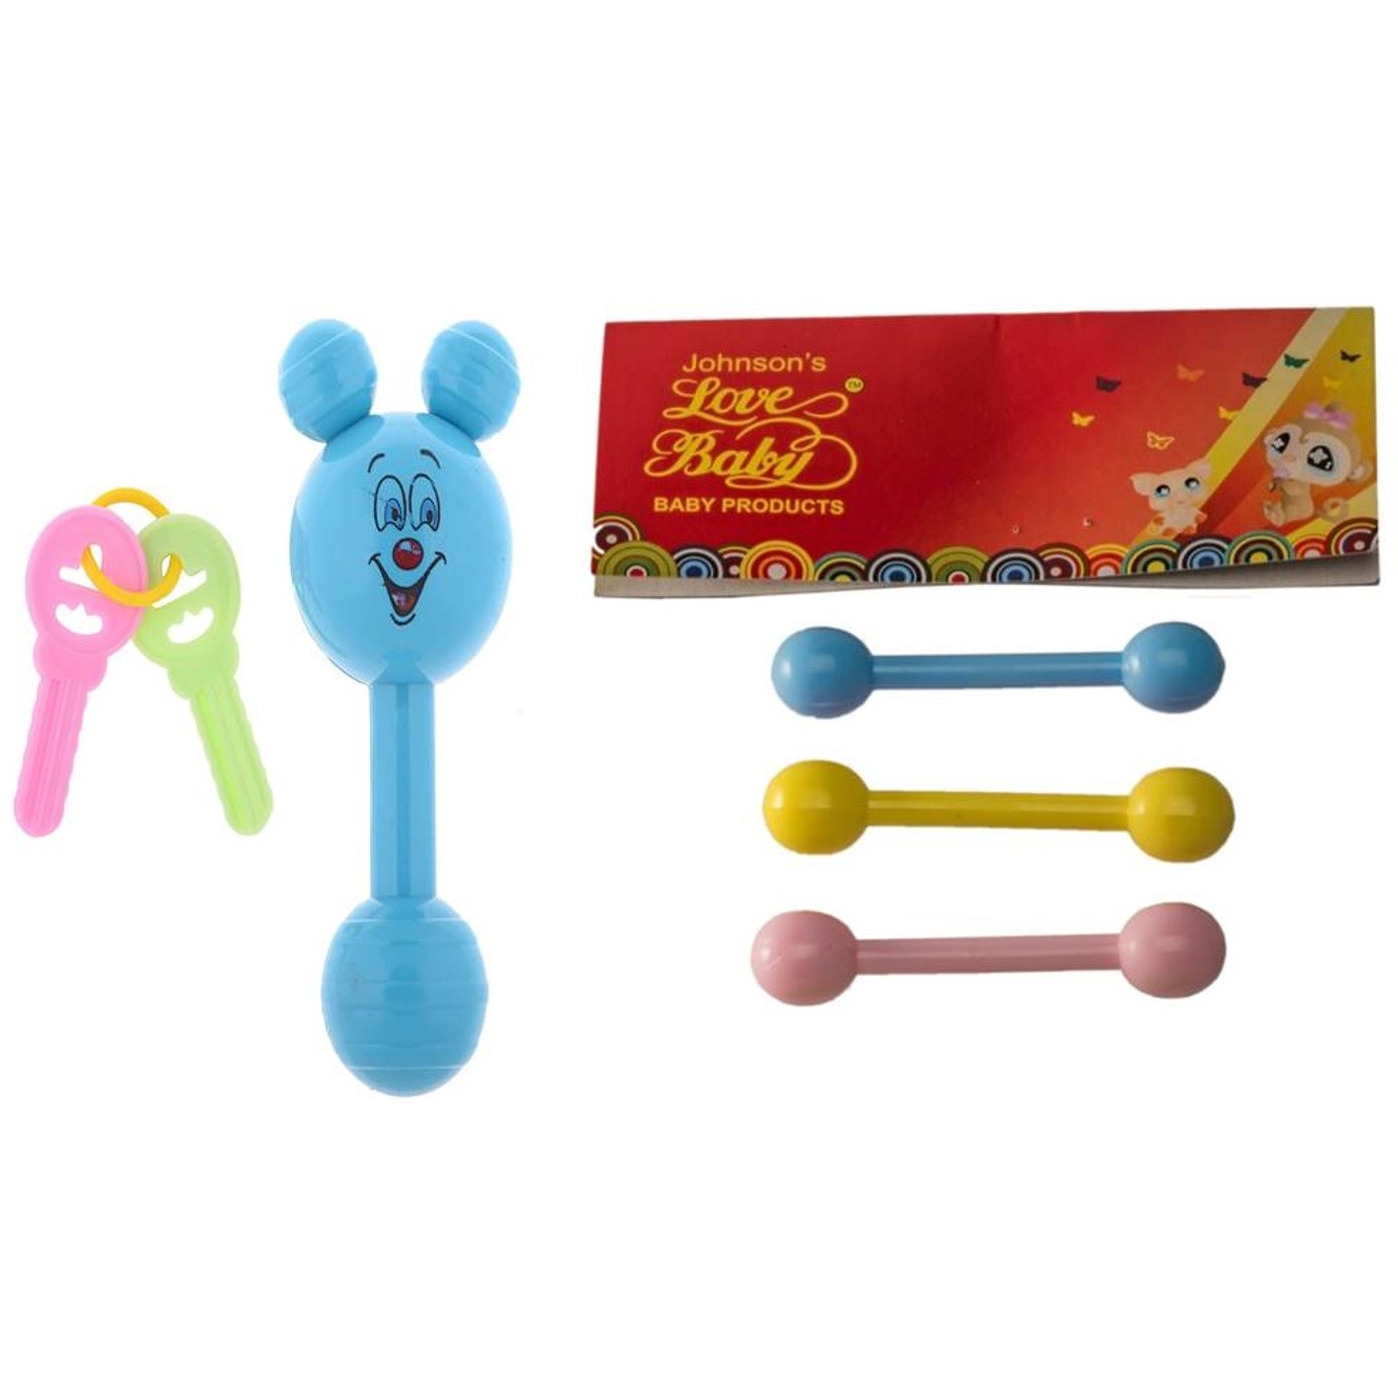 Auto Flow Rattle Toy - Jinny Toy - BT27 Combo Blue